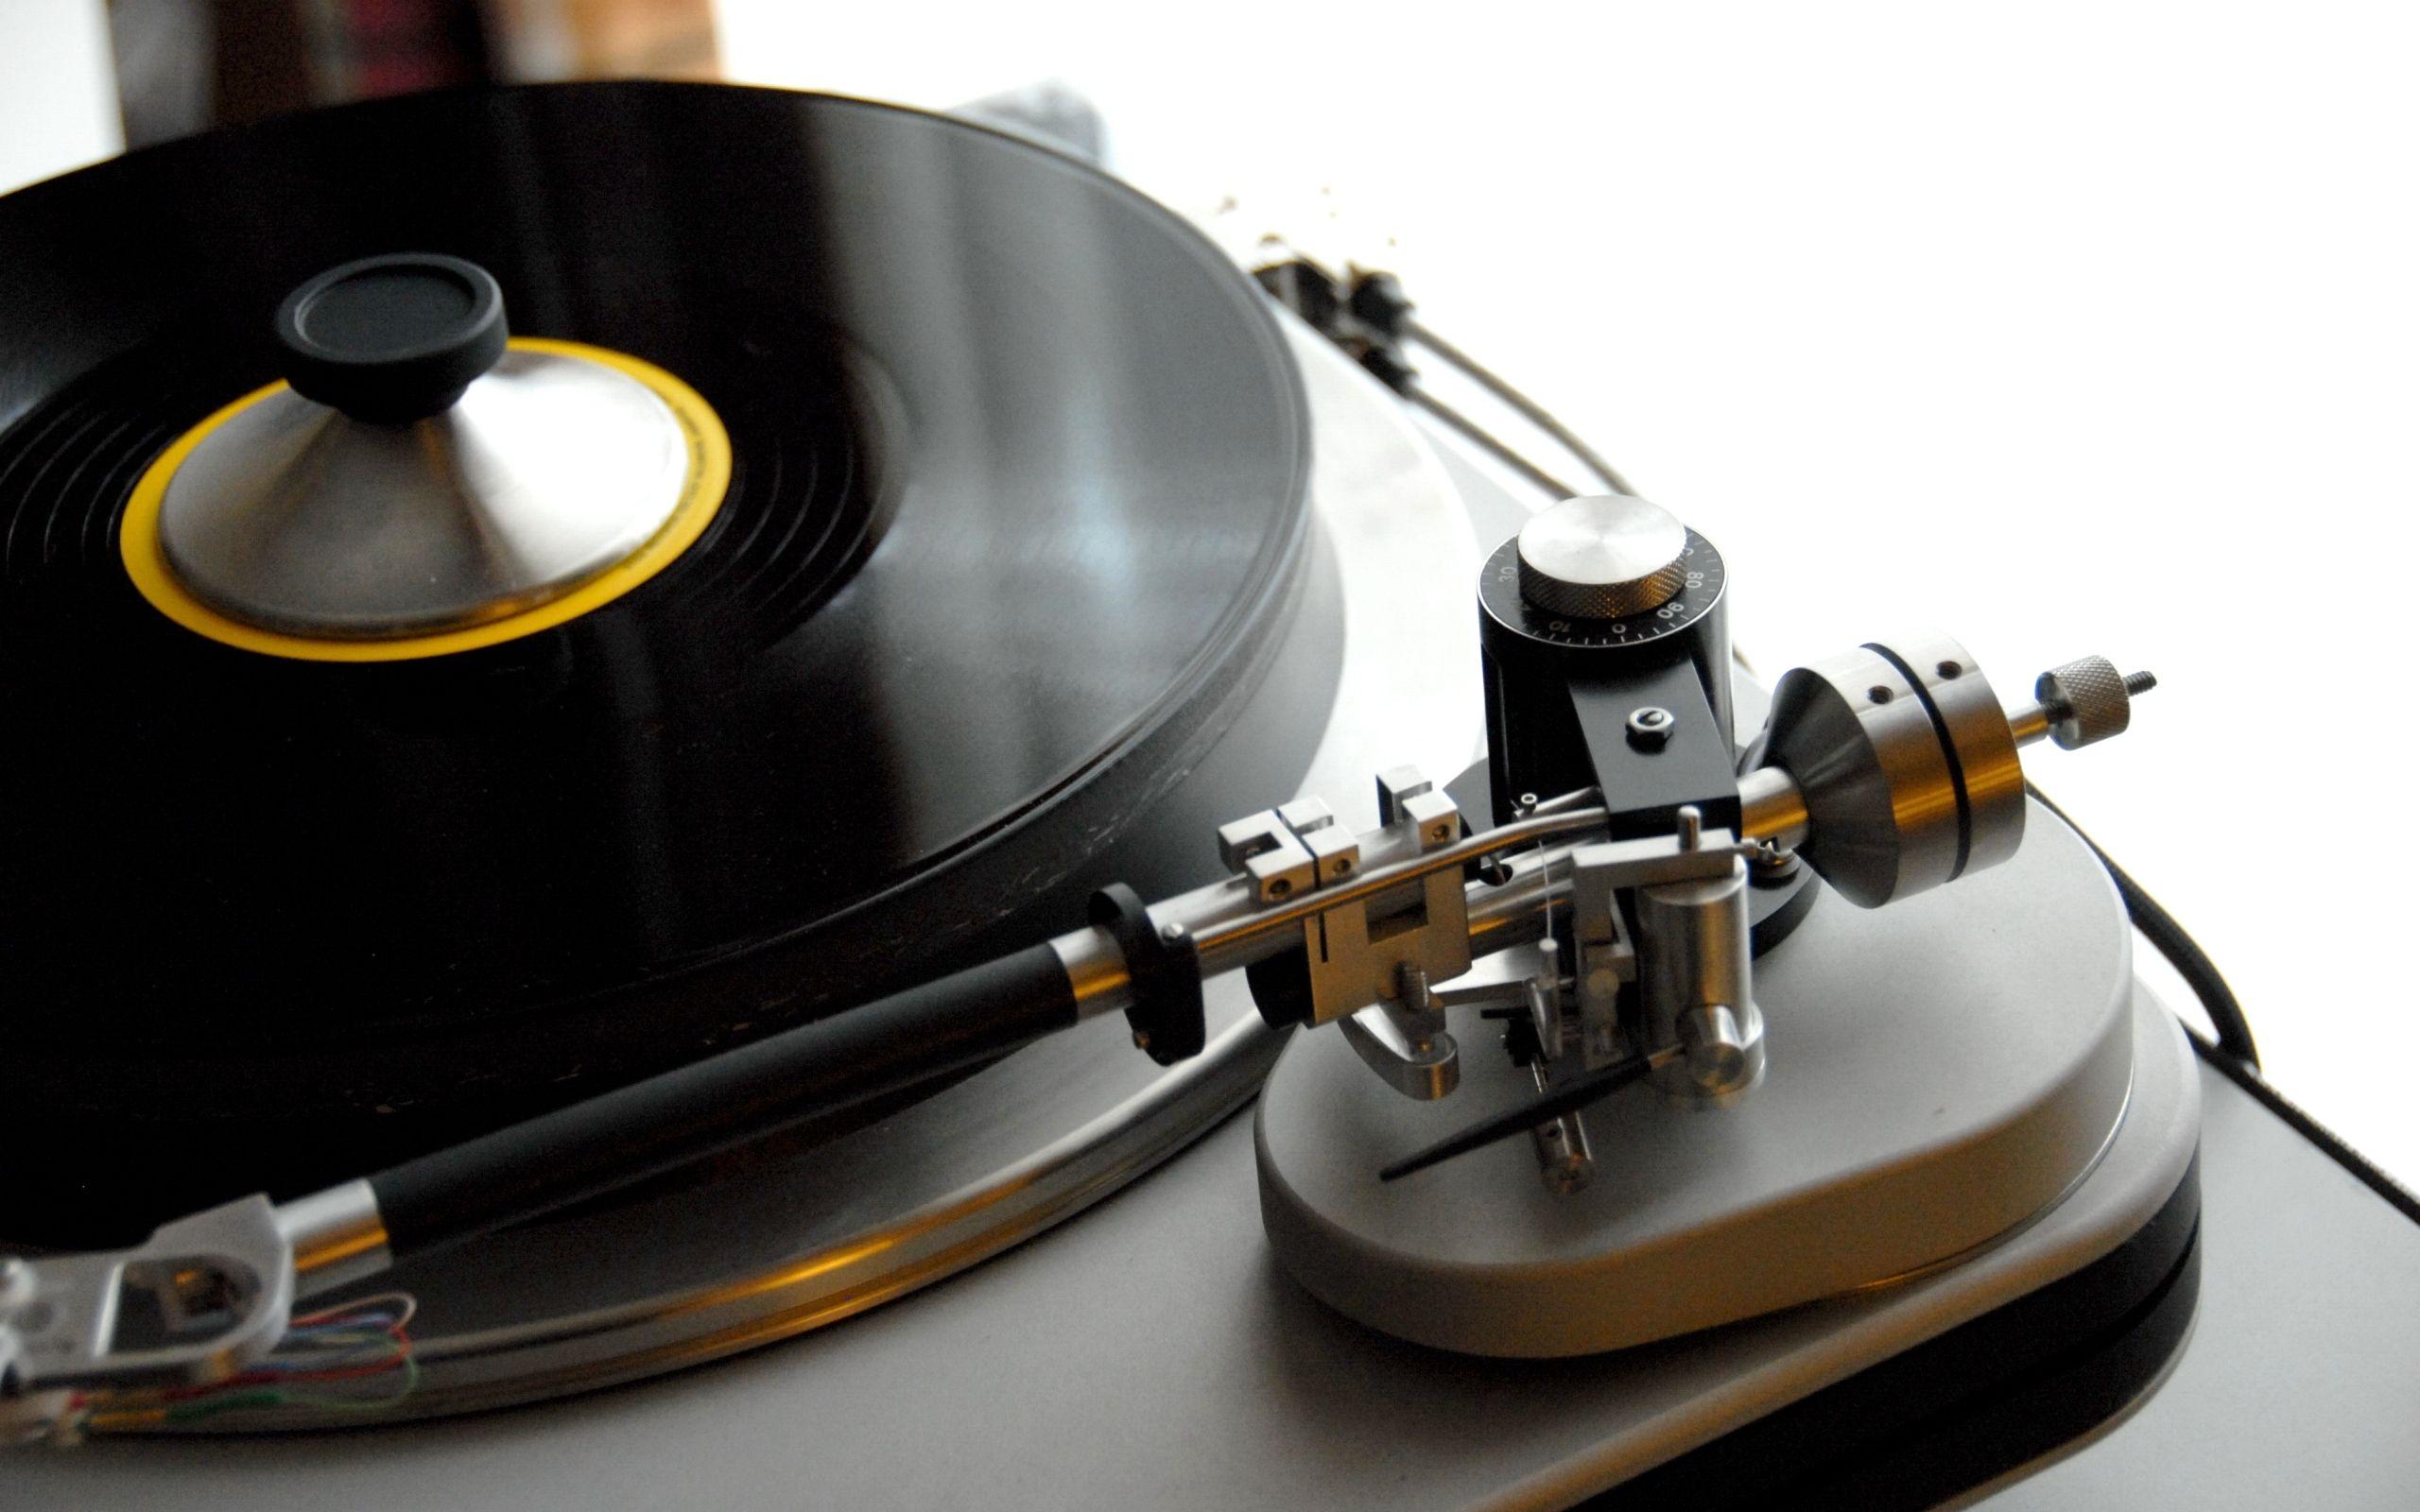 Turntable Wallpaper, HD Turntable Wallpaper and Photo. View